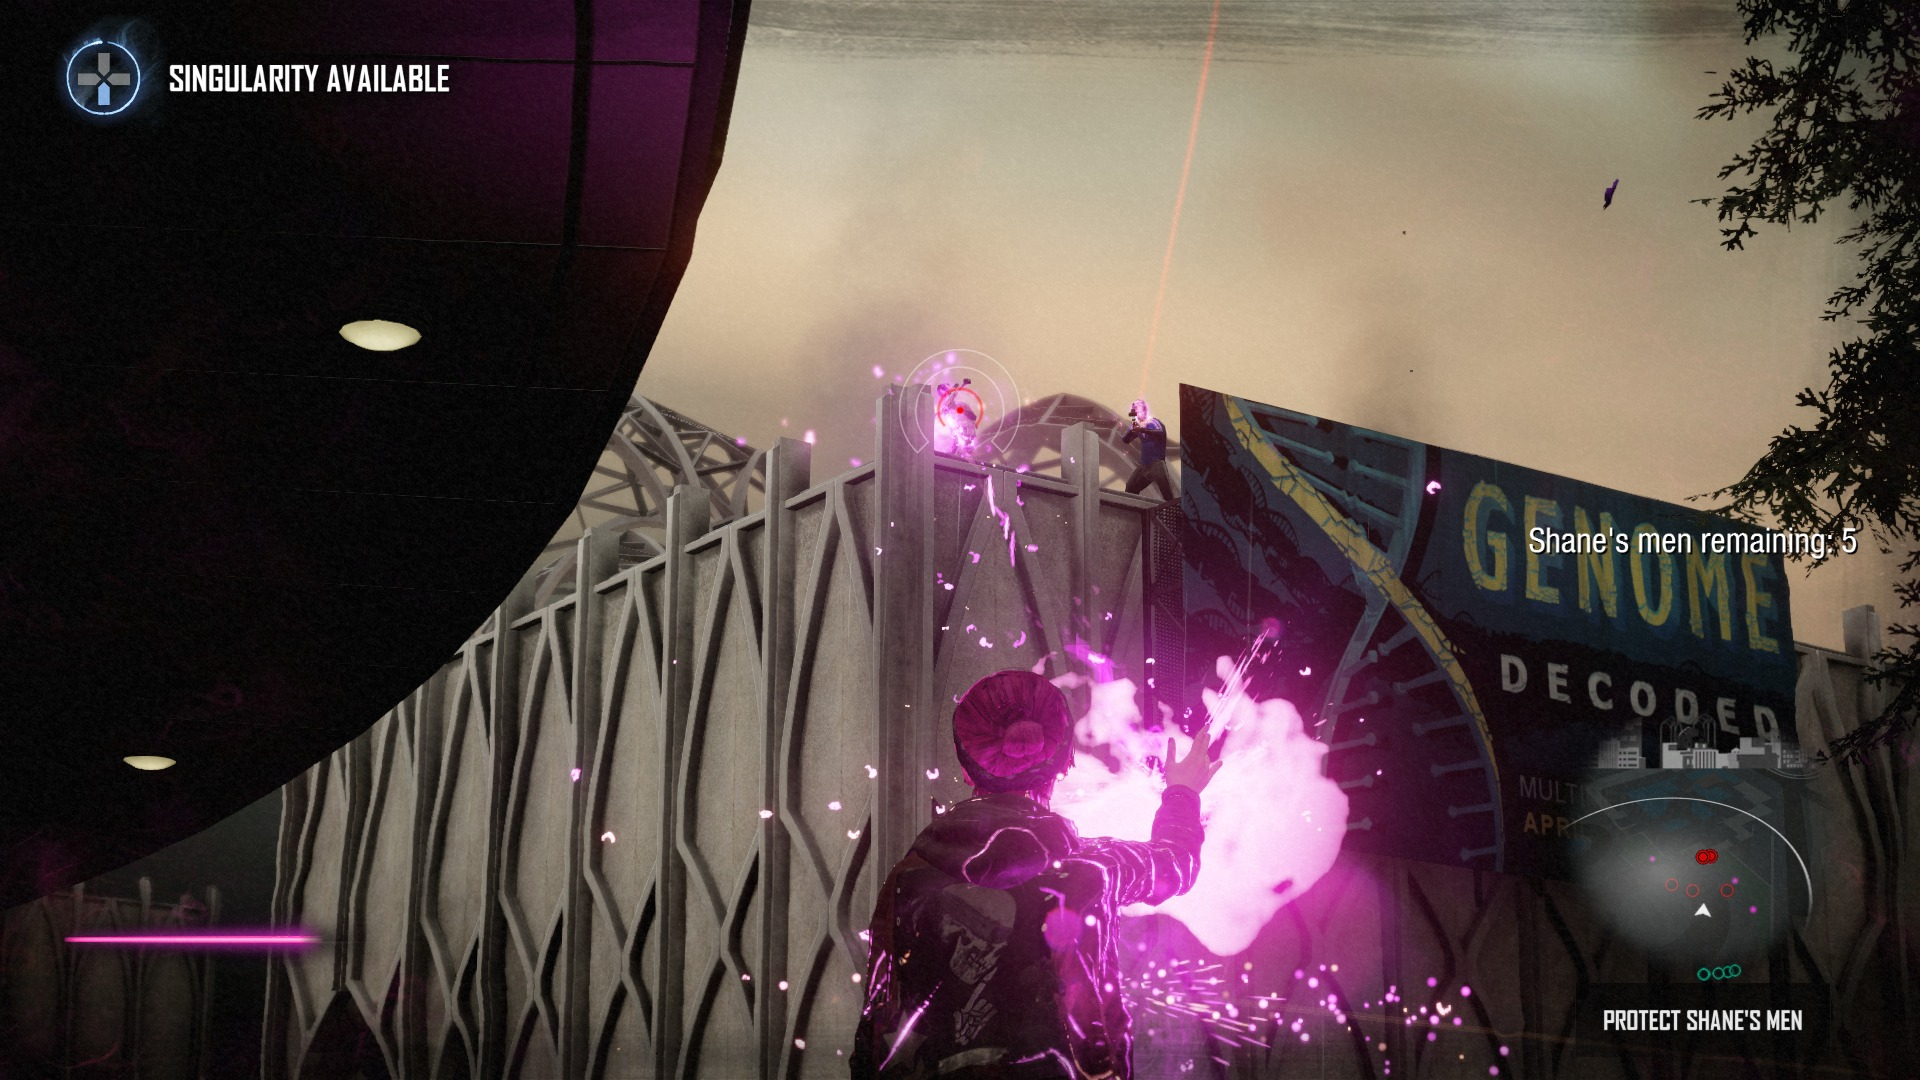 inFAMOUS First Light